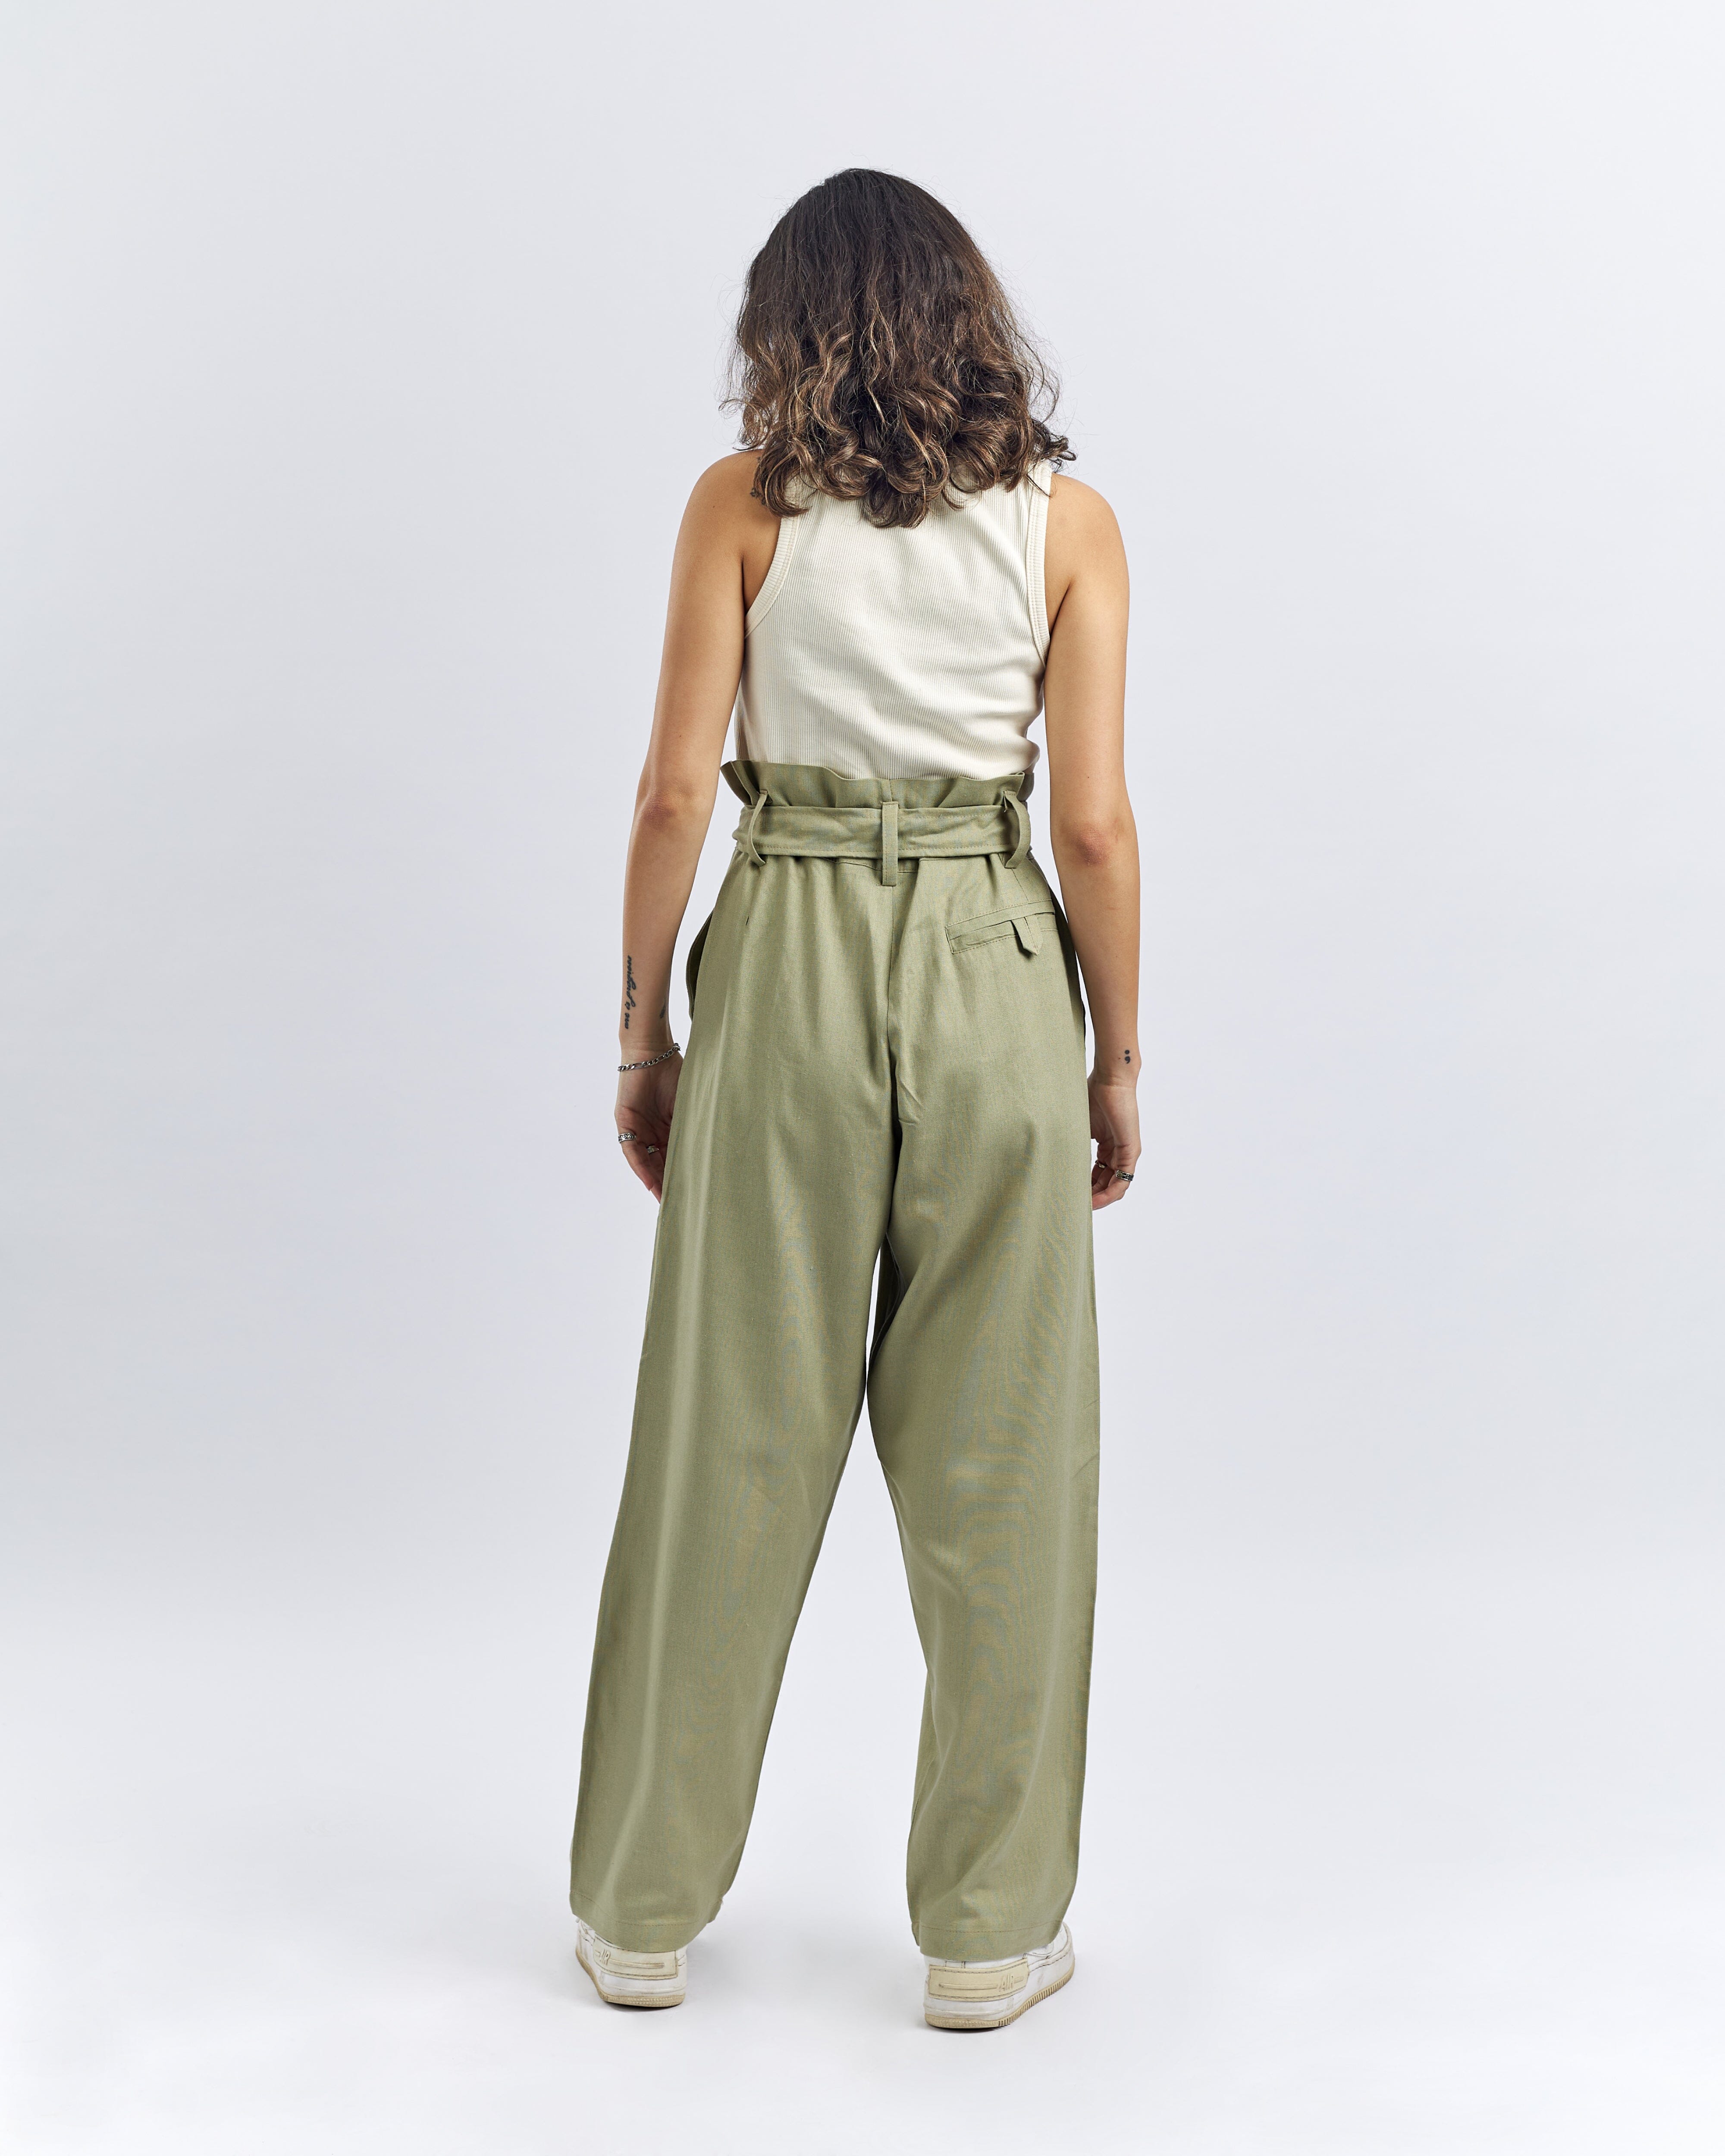 Frosty Green - Linen Pants TheMakeovr 